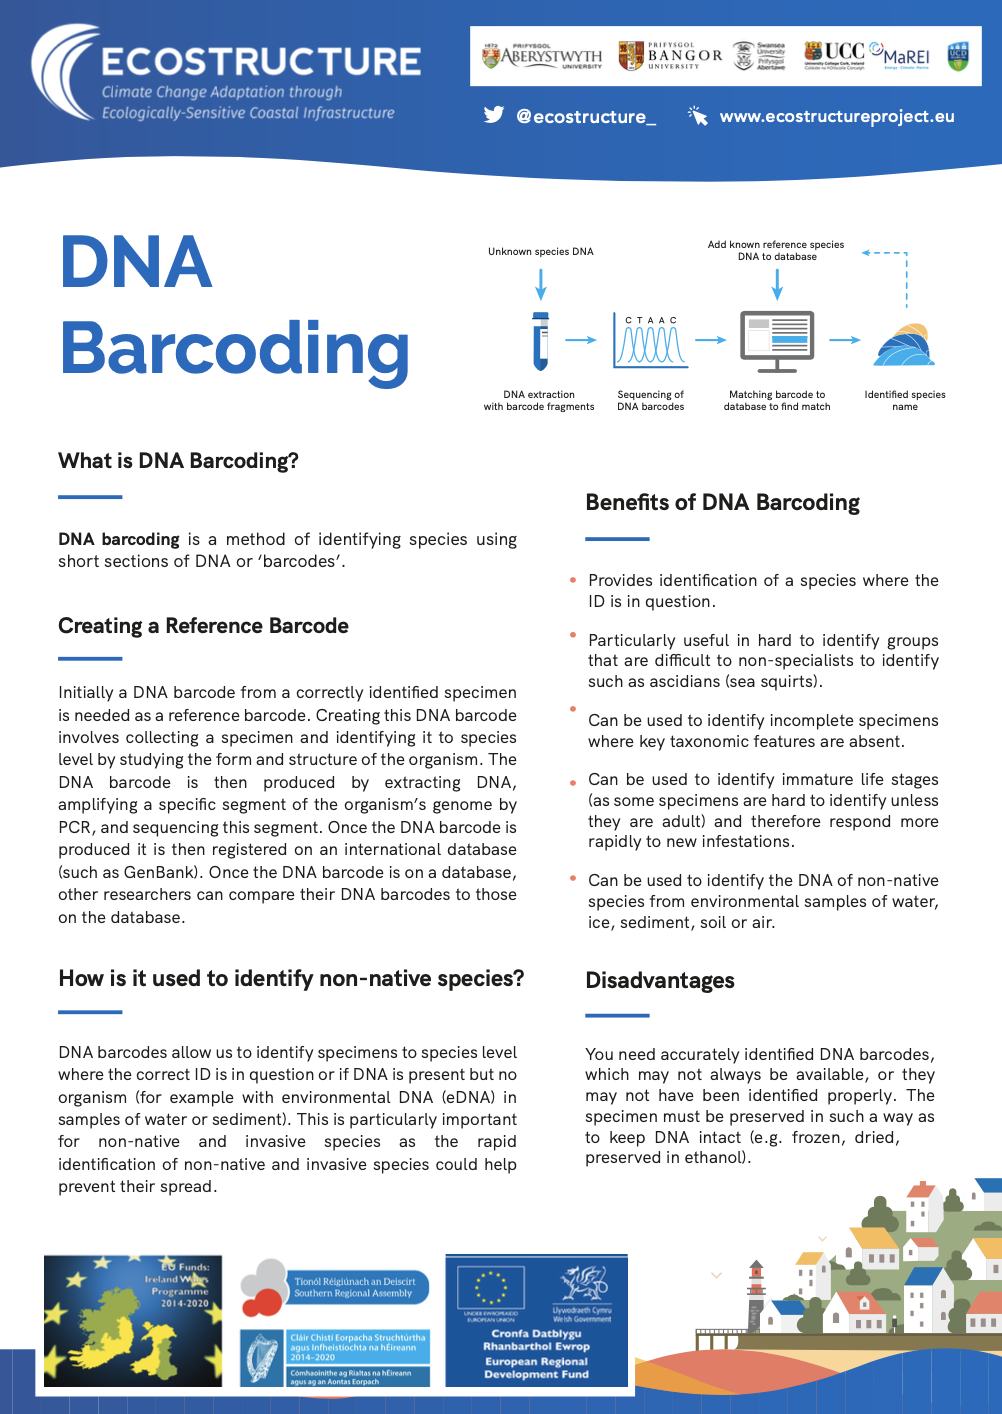 A fact sheet about DNA Barcoding, produced for Ecostructure.